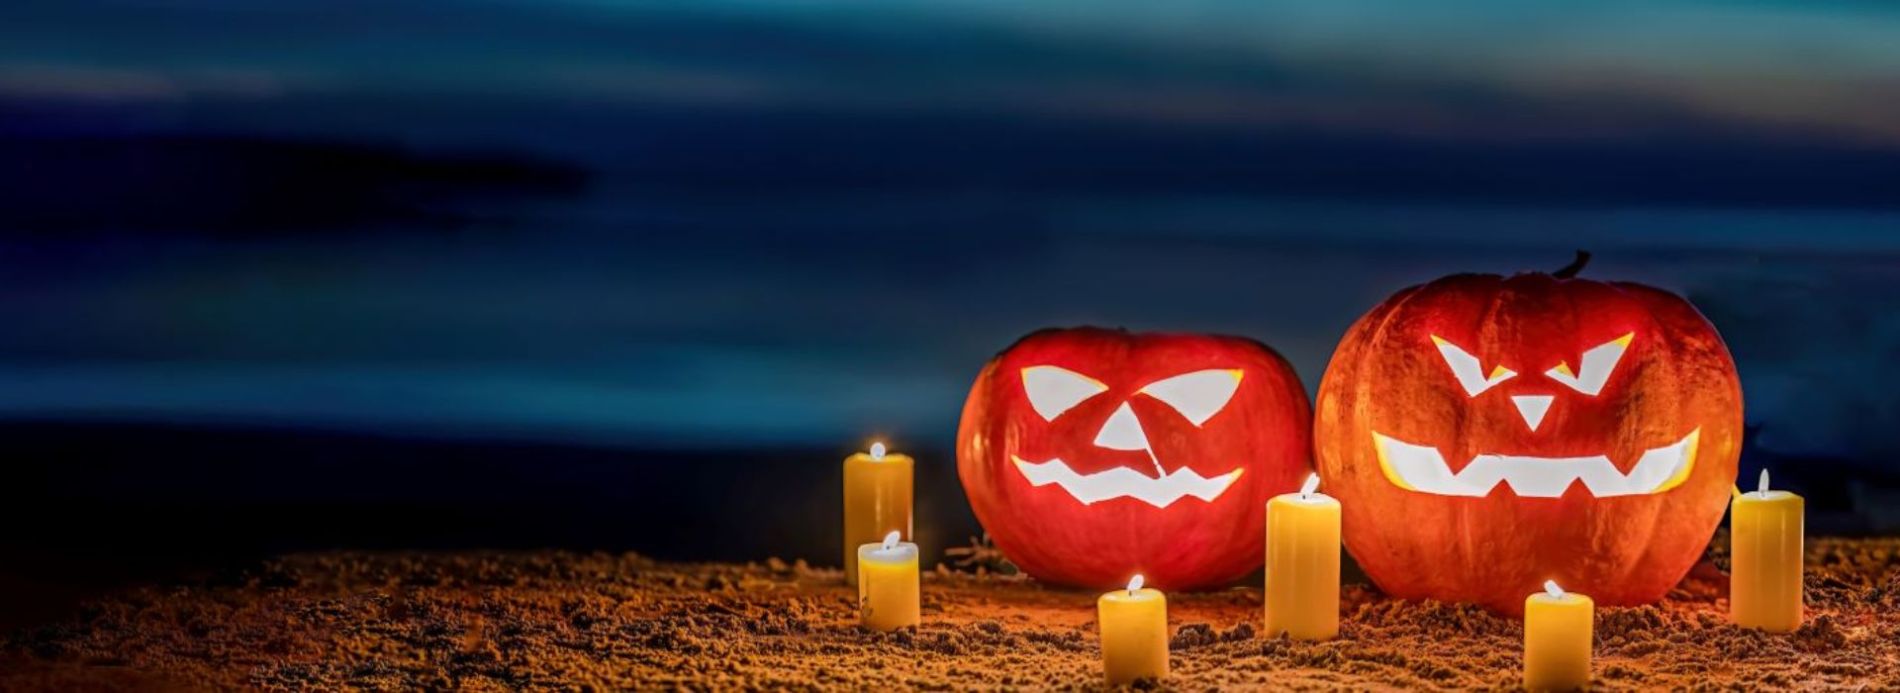 Anna Maria Island Attractions for Spooky Season Feature Image